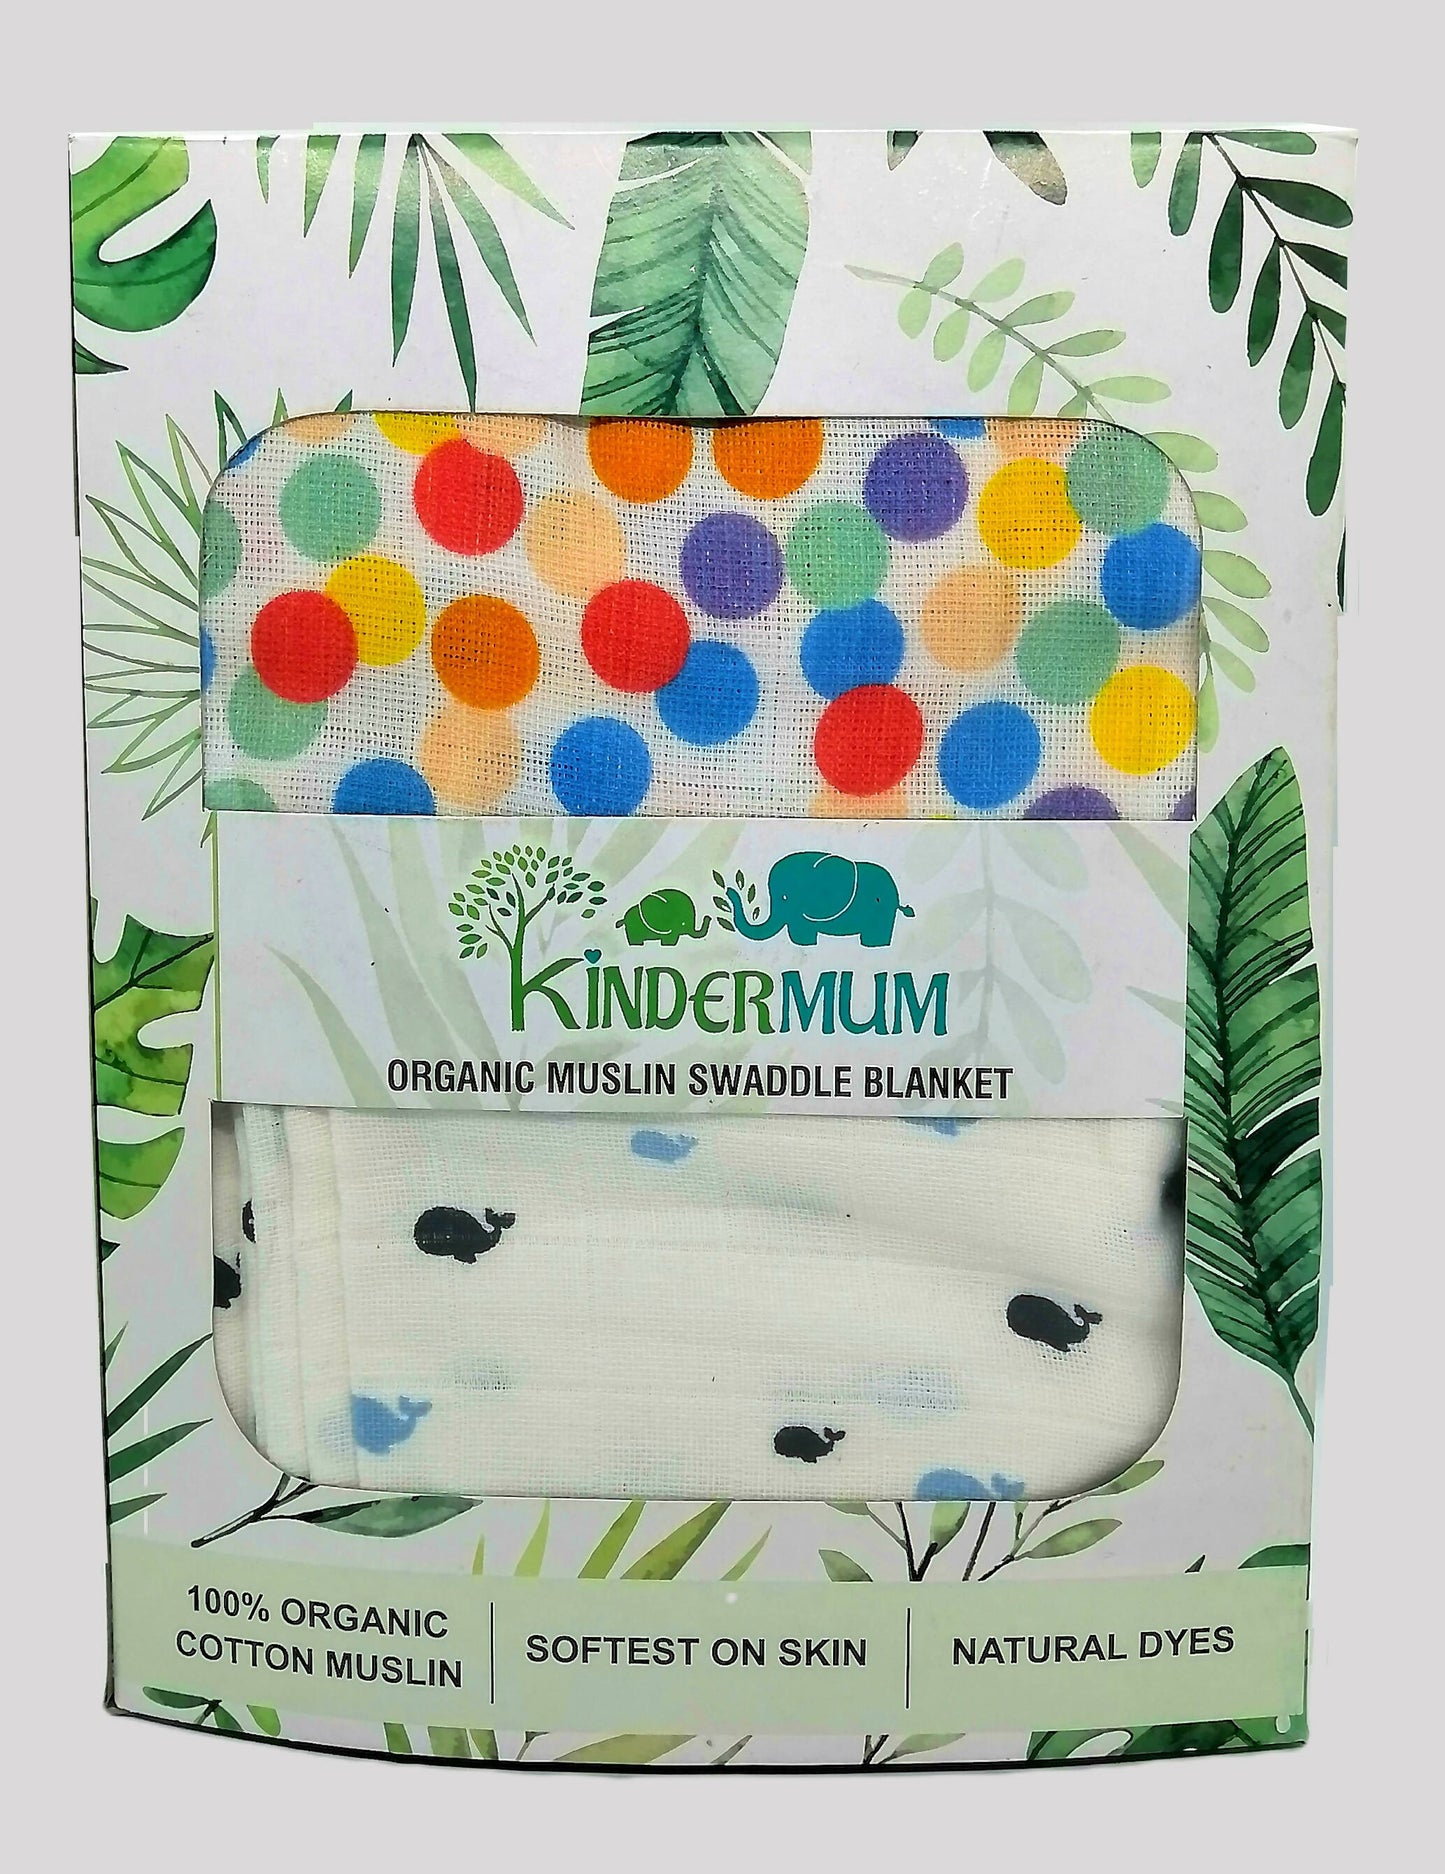 Kindermum Organic Cotton Muslin Swaddle Blanket 110 Cm X 110 Cm - Set Of 2 - Colorful Polka And Whale